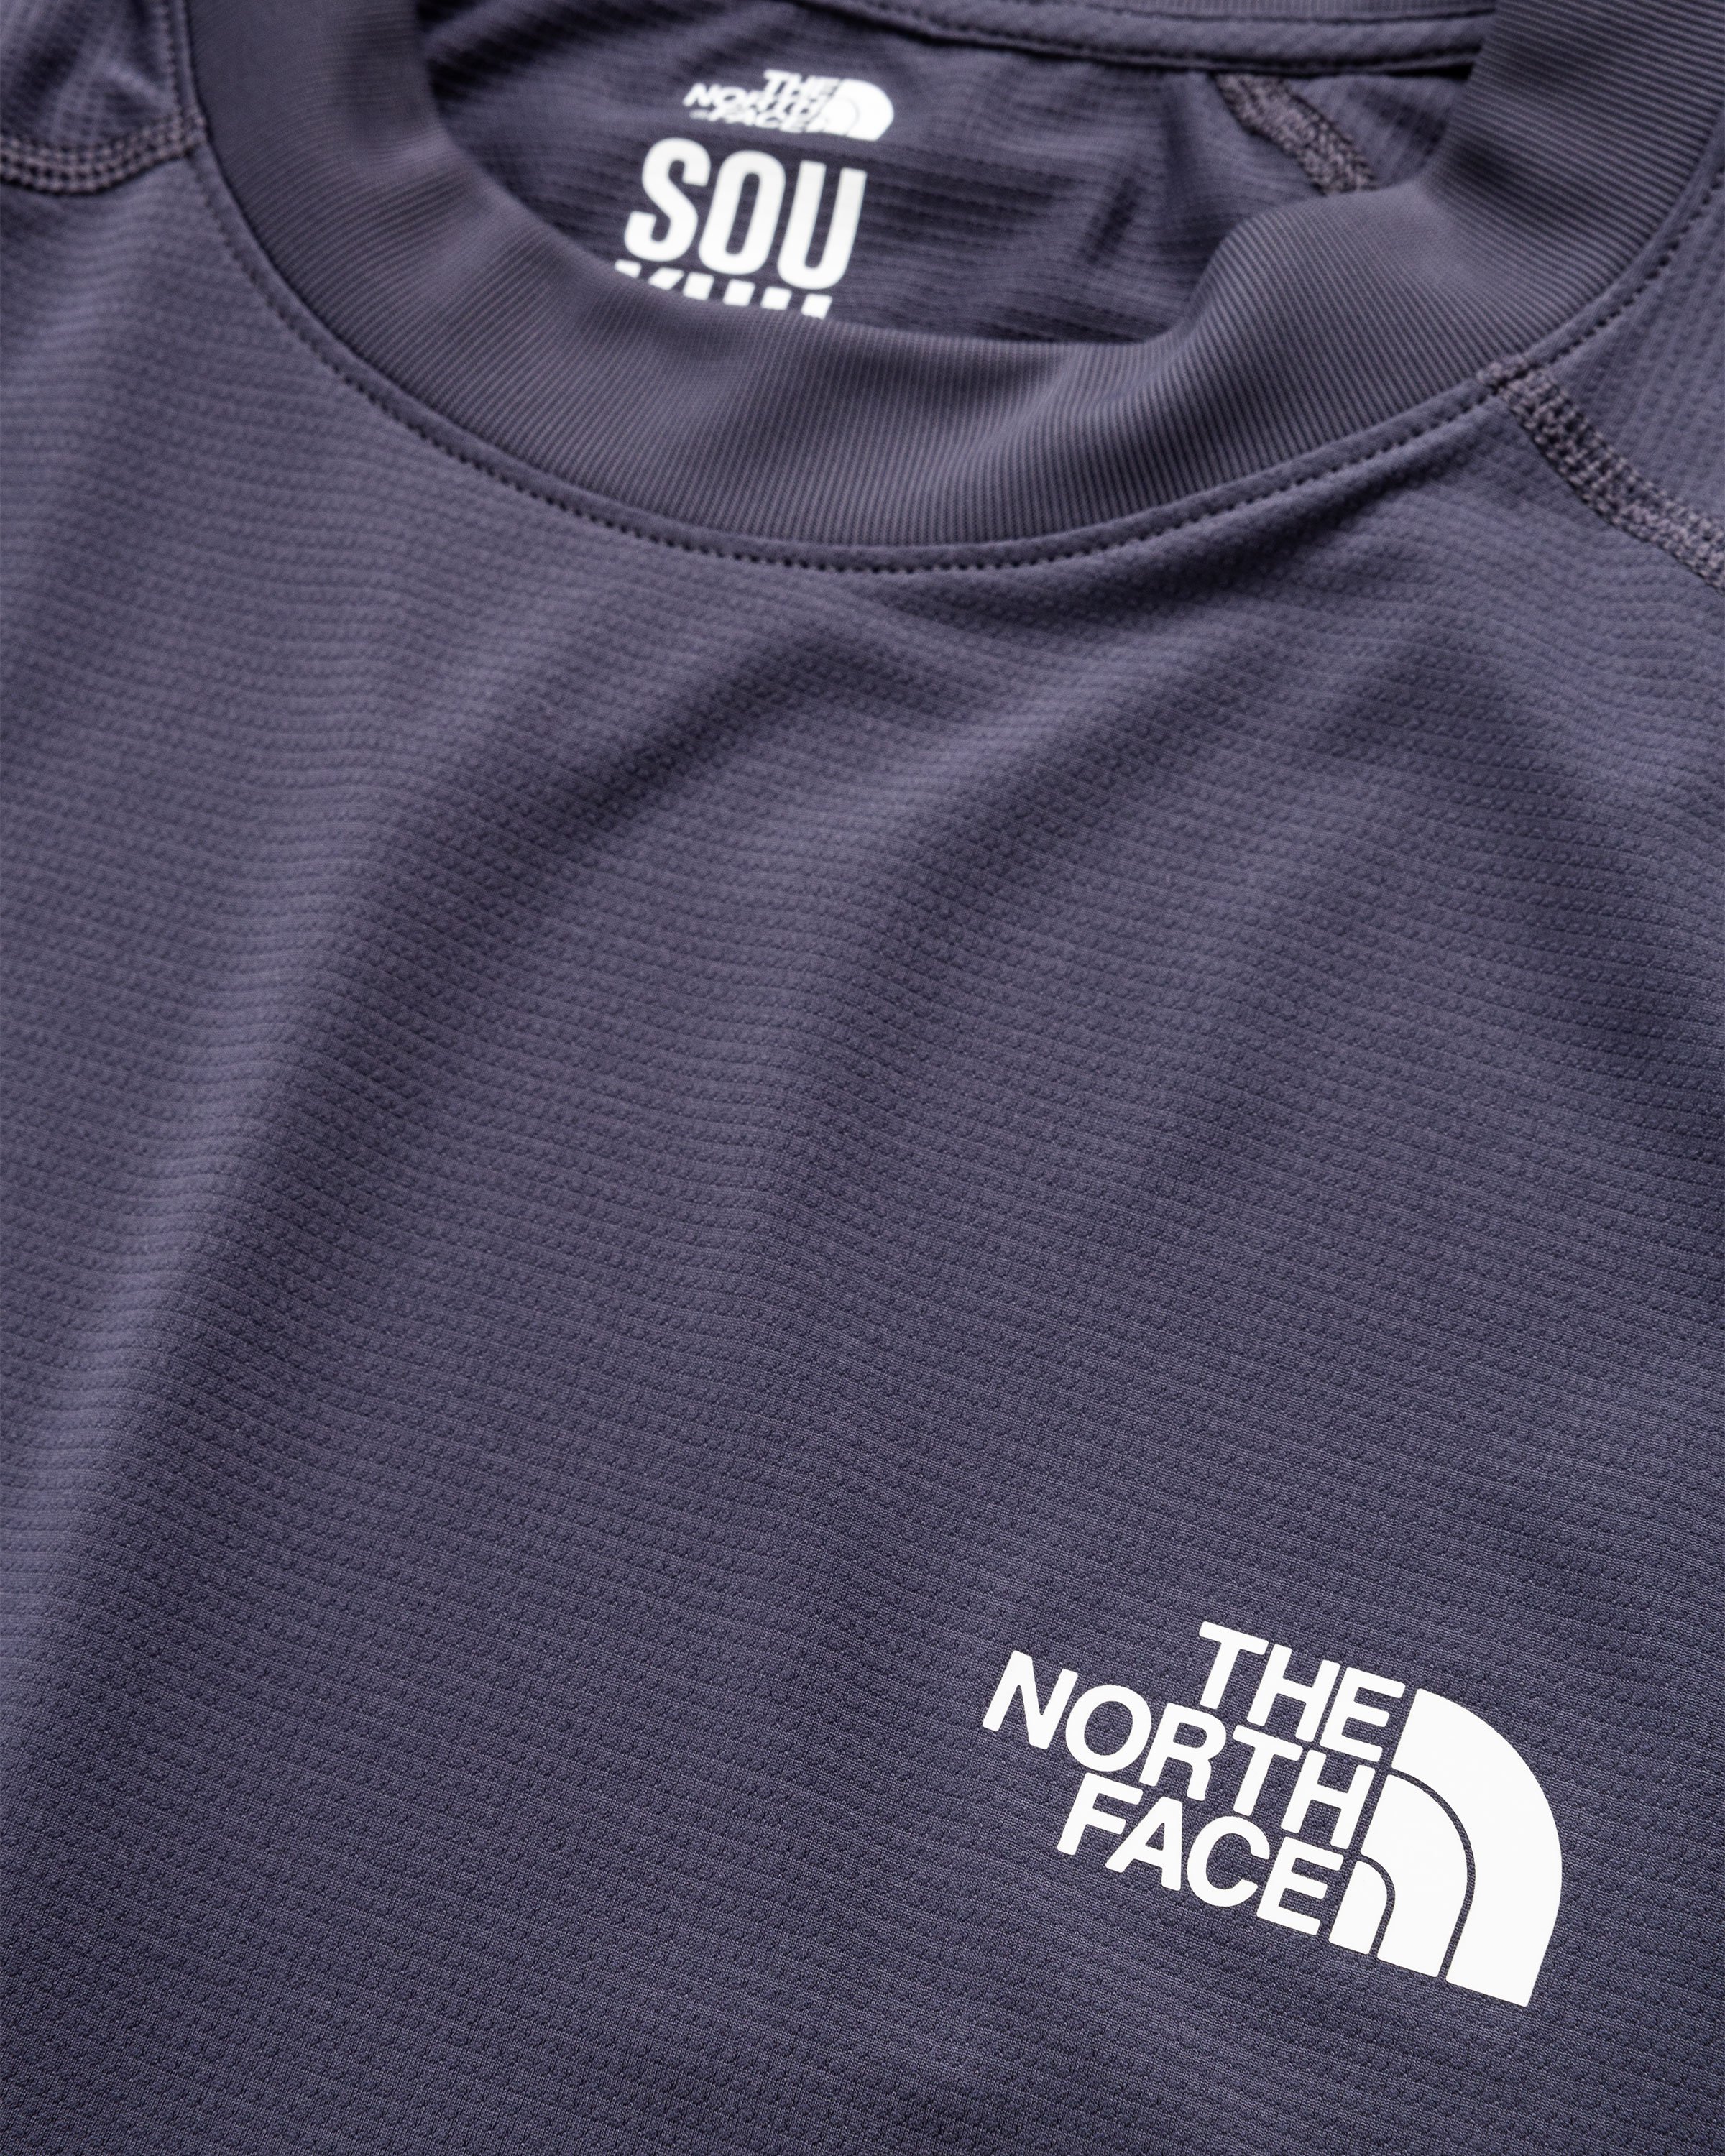 The North Face x UNDERCOVER - SOUKUU TRAIL RUN S/S TEE PERISCOPE GREY/DARK EAR - Clothing - Grey - Image 6